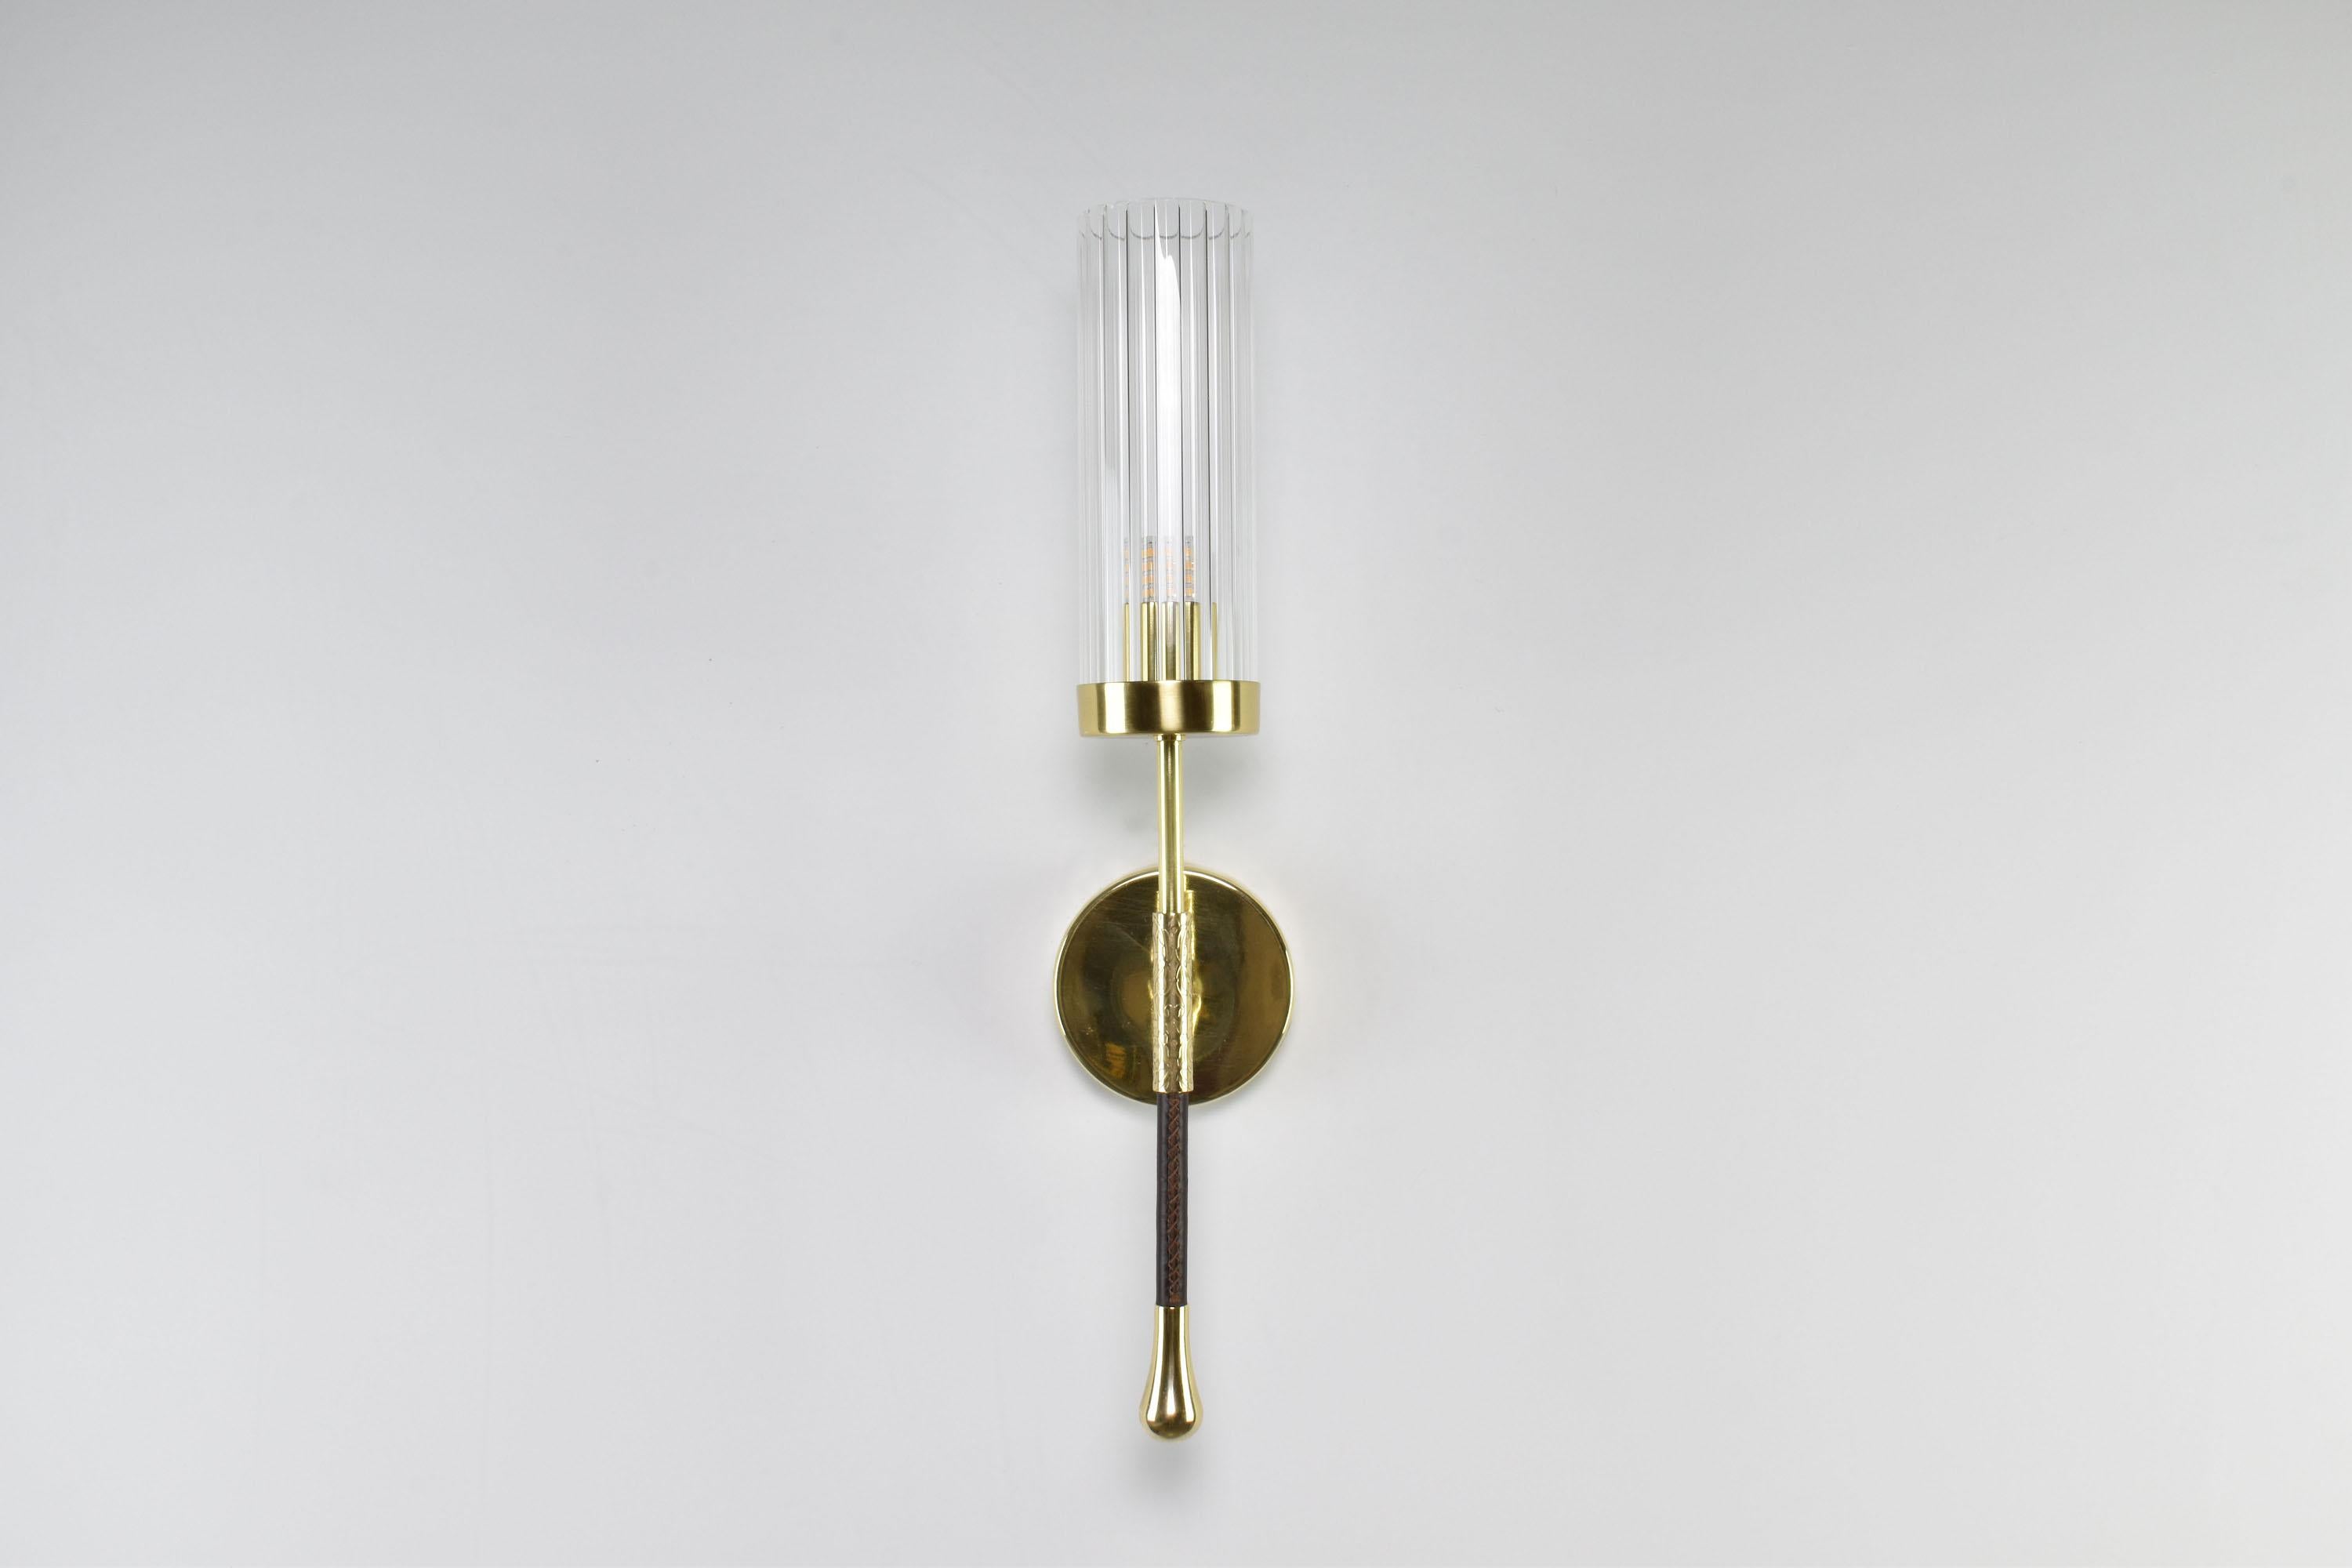 The Daya-wo1 wall light boasts a timeless brass structure. Its leather-sheathed stem at the bottom adds a touch of refinement to the overall design, while the cylindrical textured glass shade provides a subtle yet stylish illumination to any space.